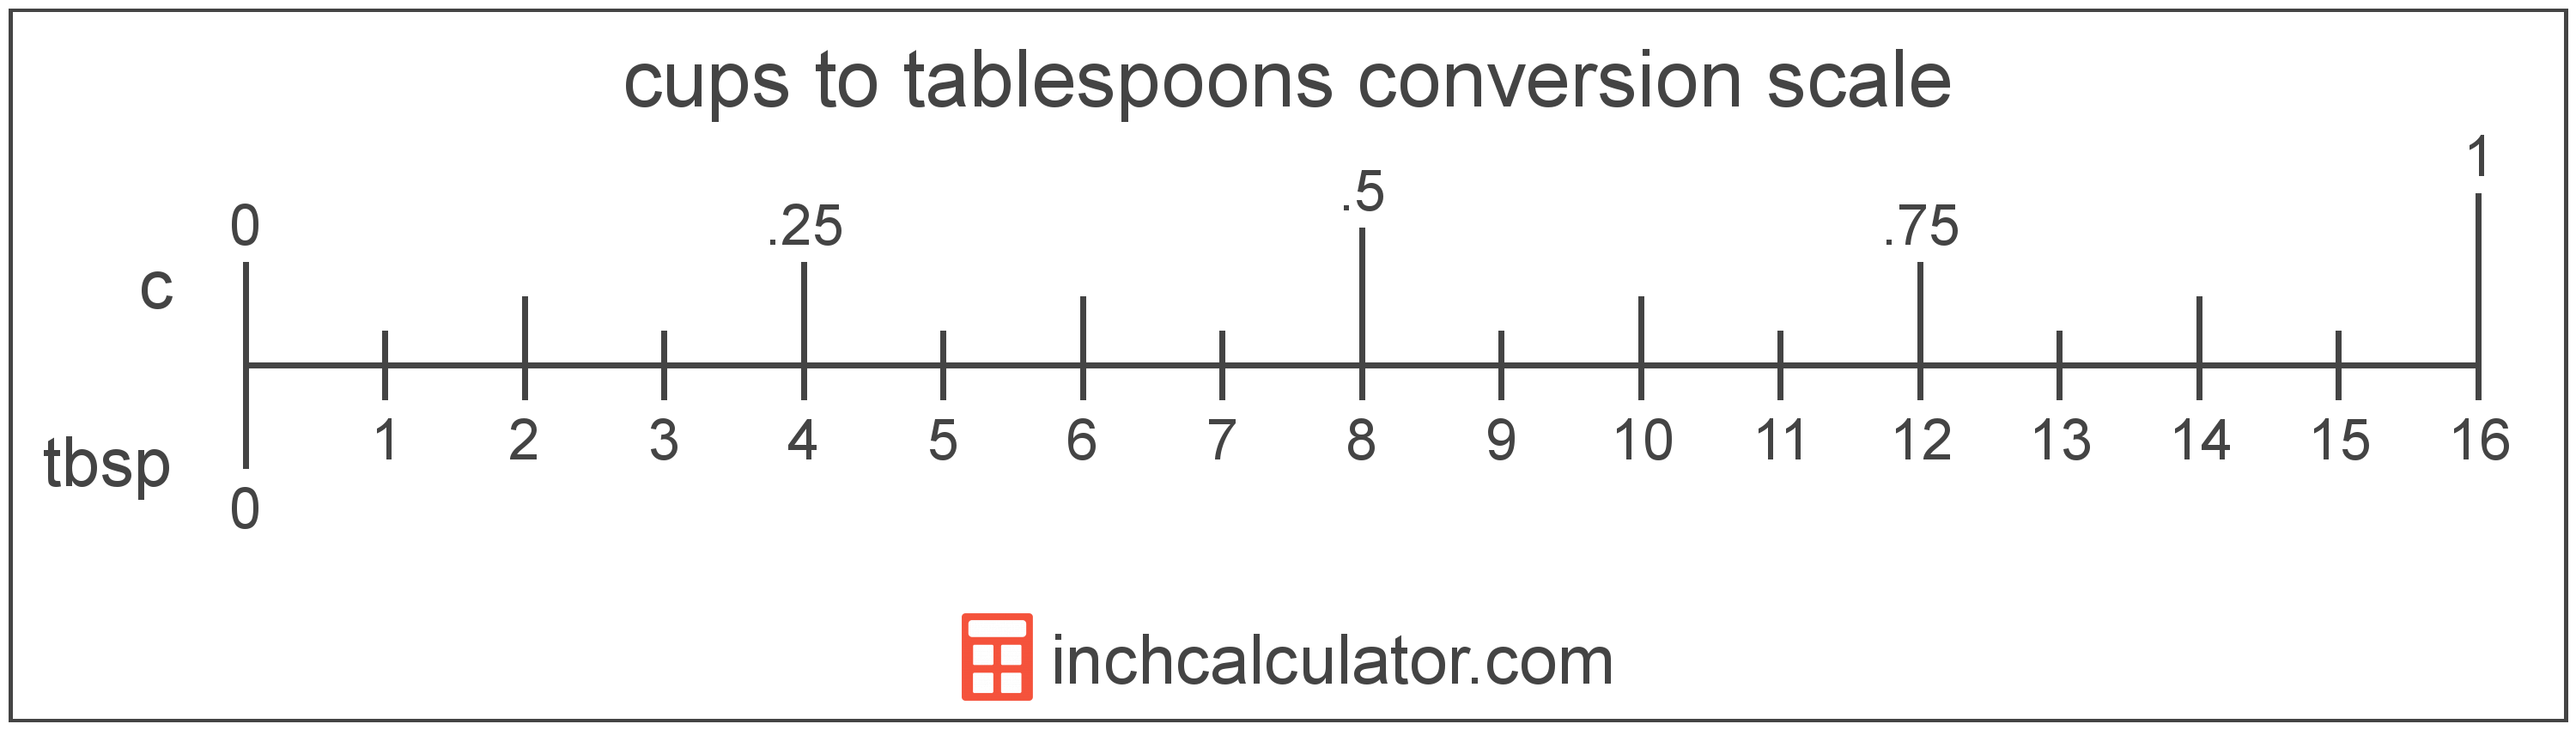 conversion scale showing cups and equivalent tablespoons volume values